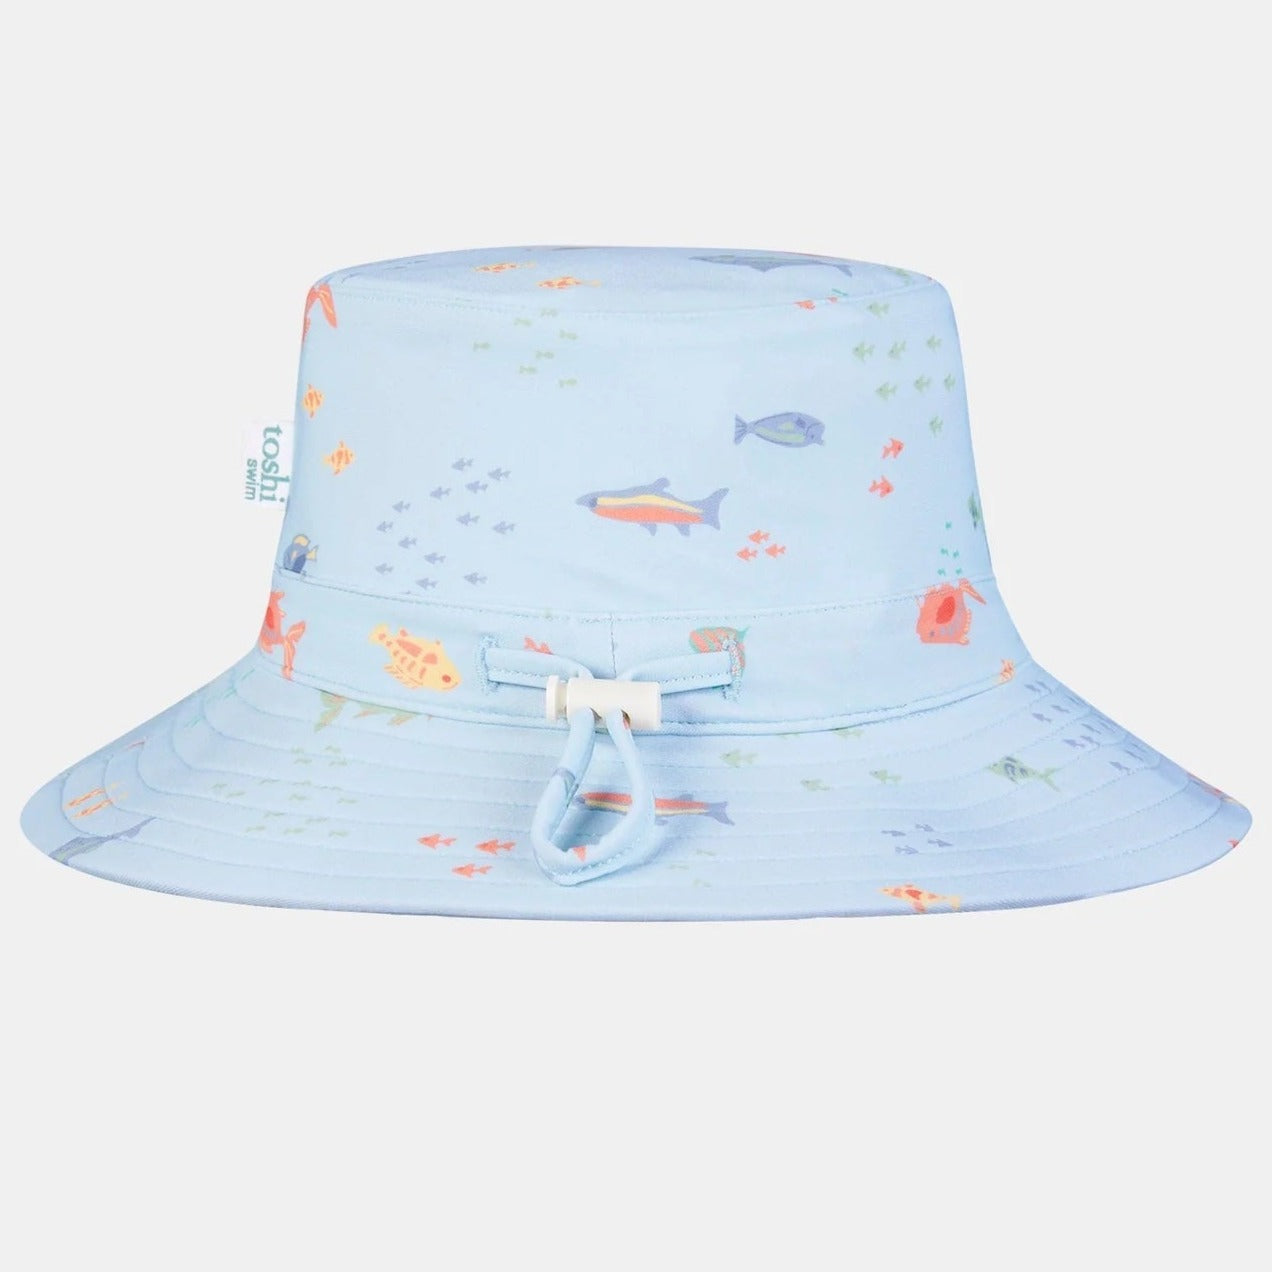 Toshi baby swim hat - angus and dudley